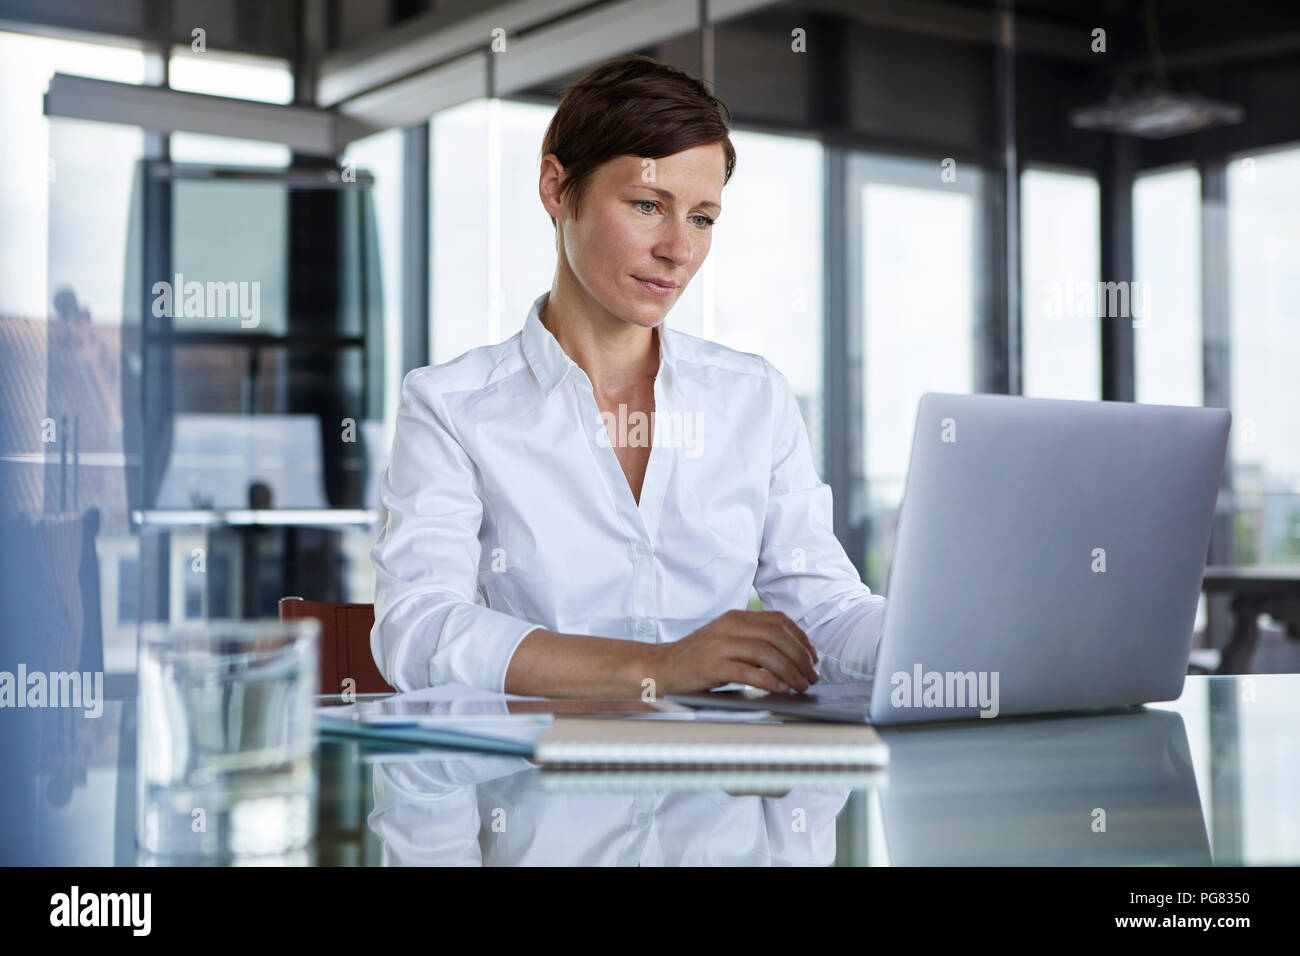 Businesswoman sitting at glass table in office using laptop Stock Photo